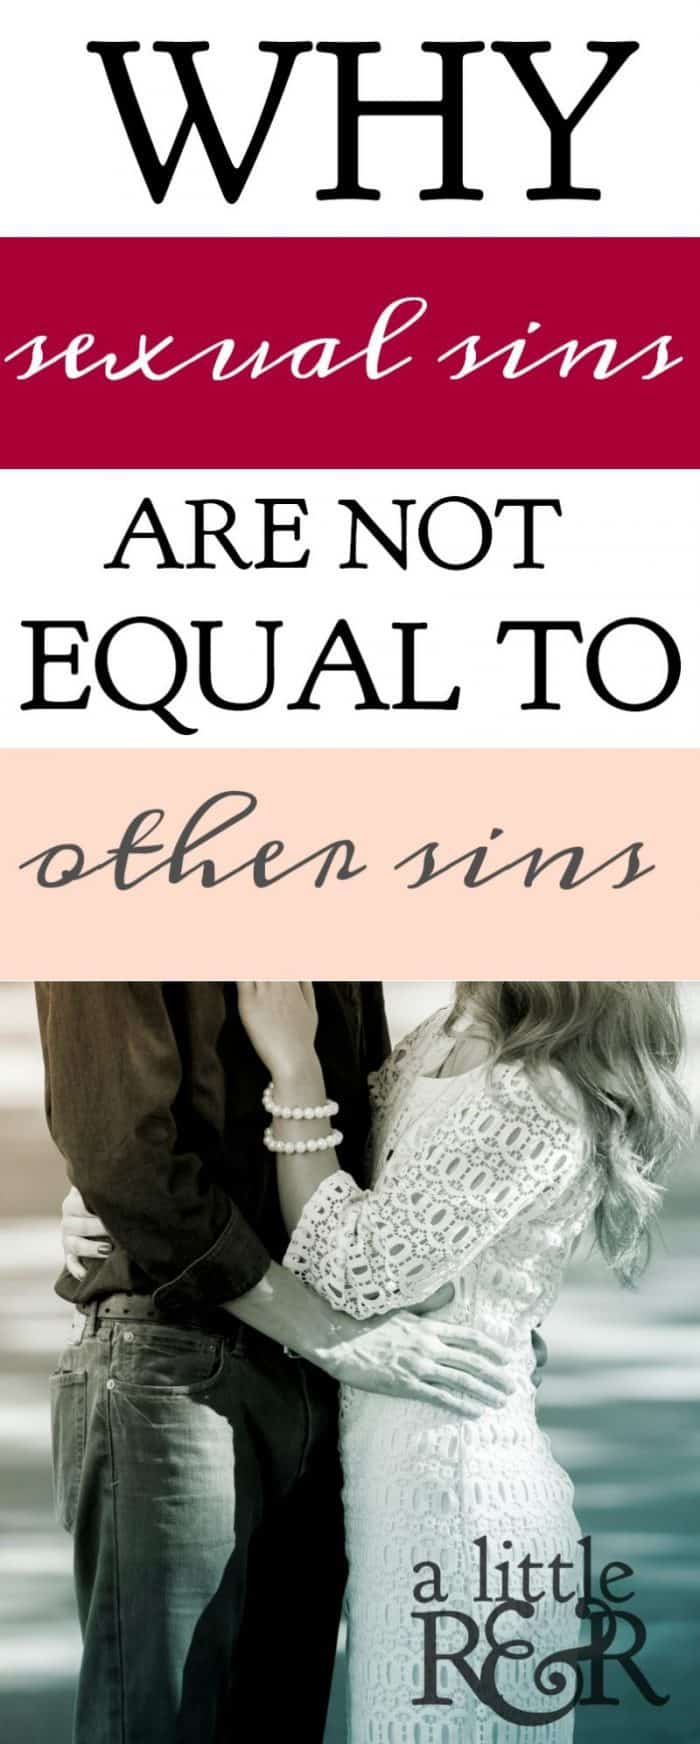 Many Christians want to be believe that all sins are equal, but that's not what the Bible says. Here is why sexual sins are not equal to other sins...but still need the same grace.